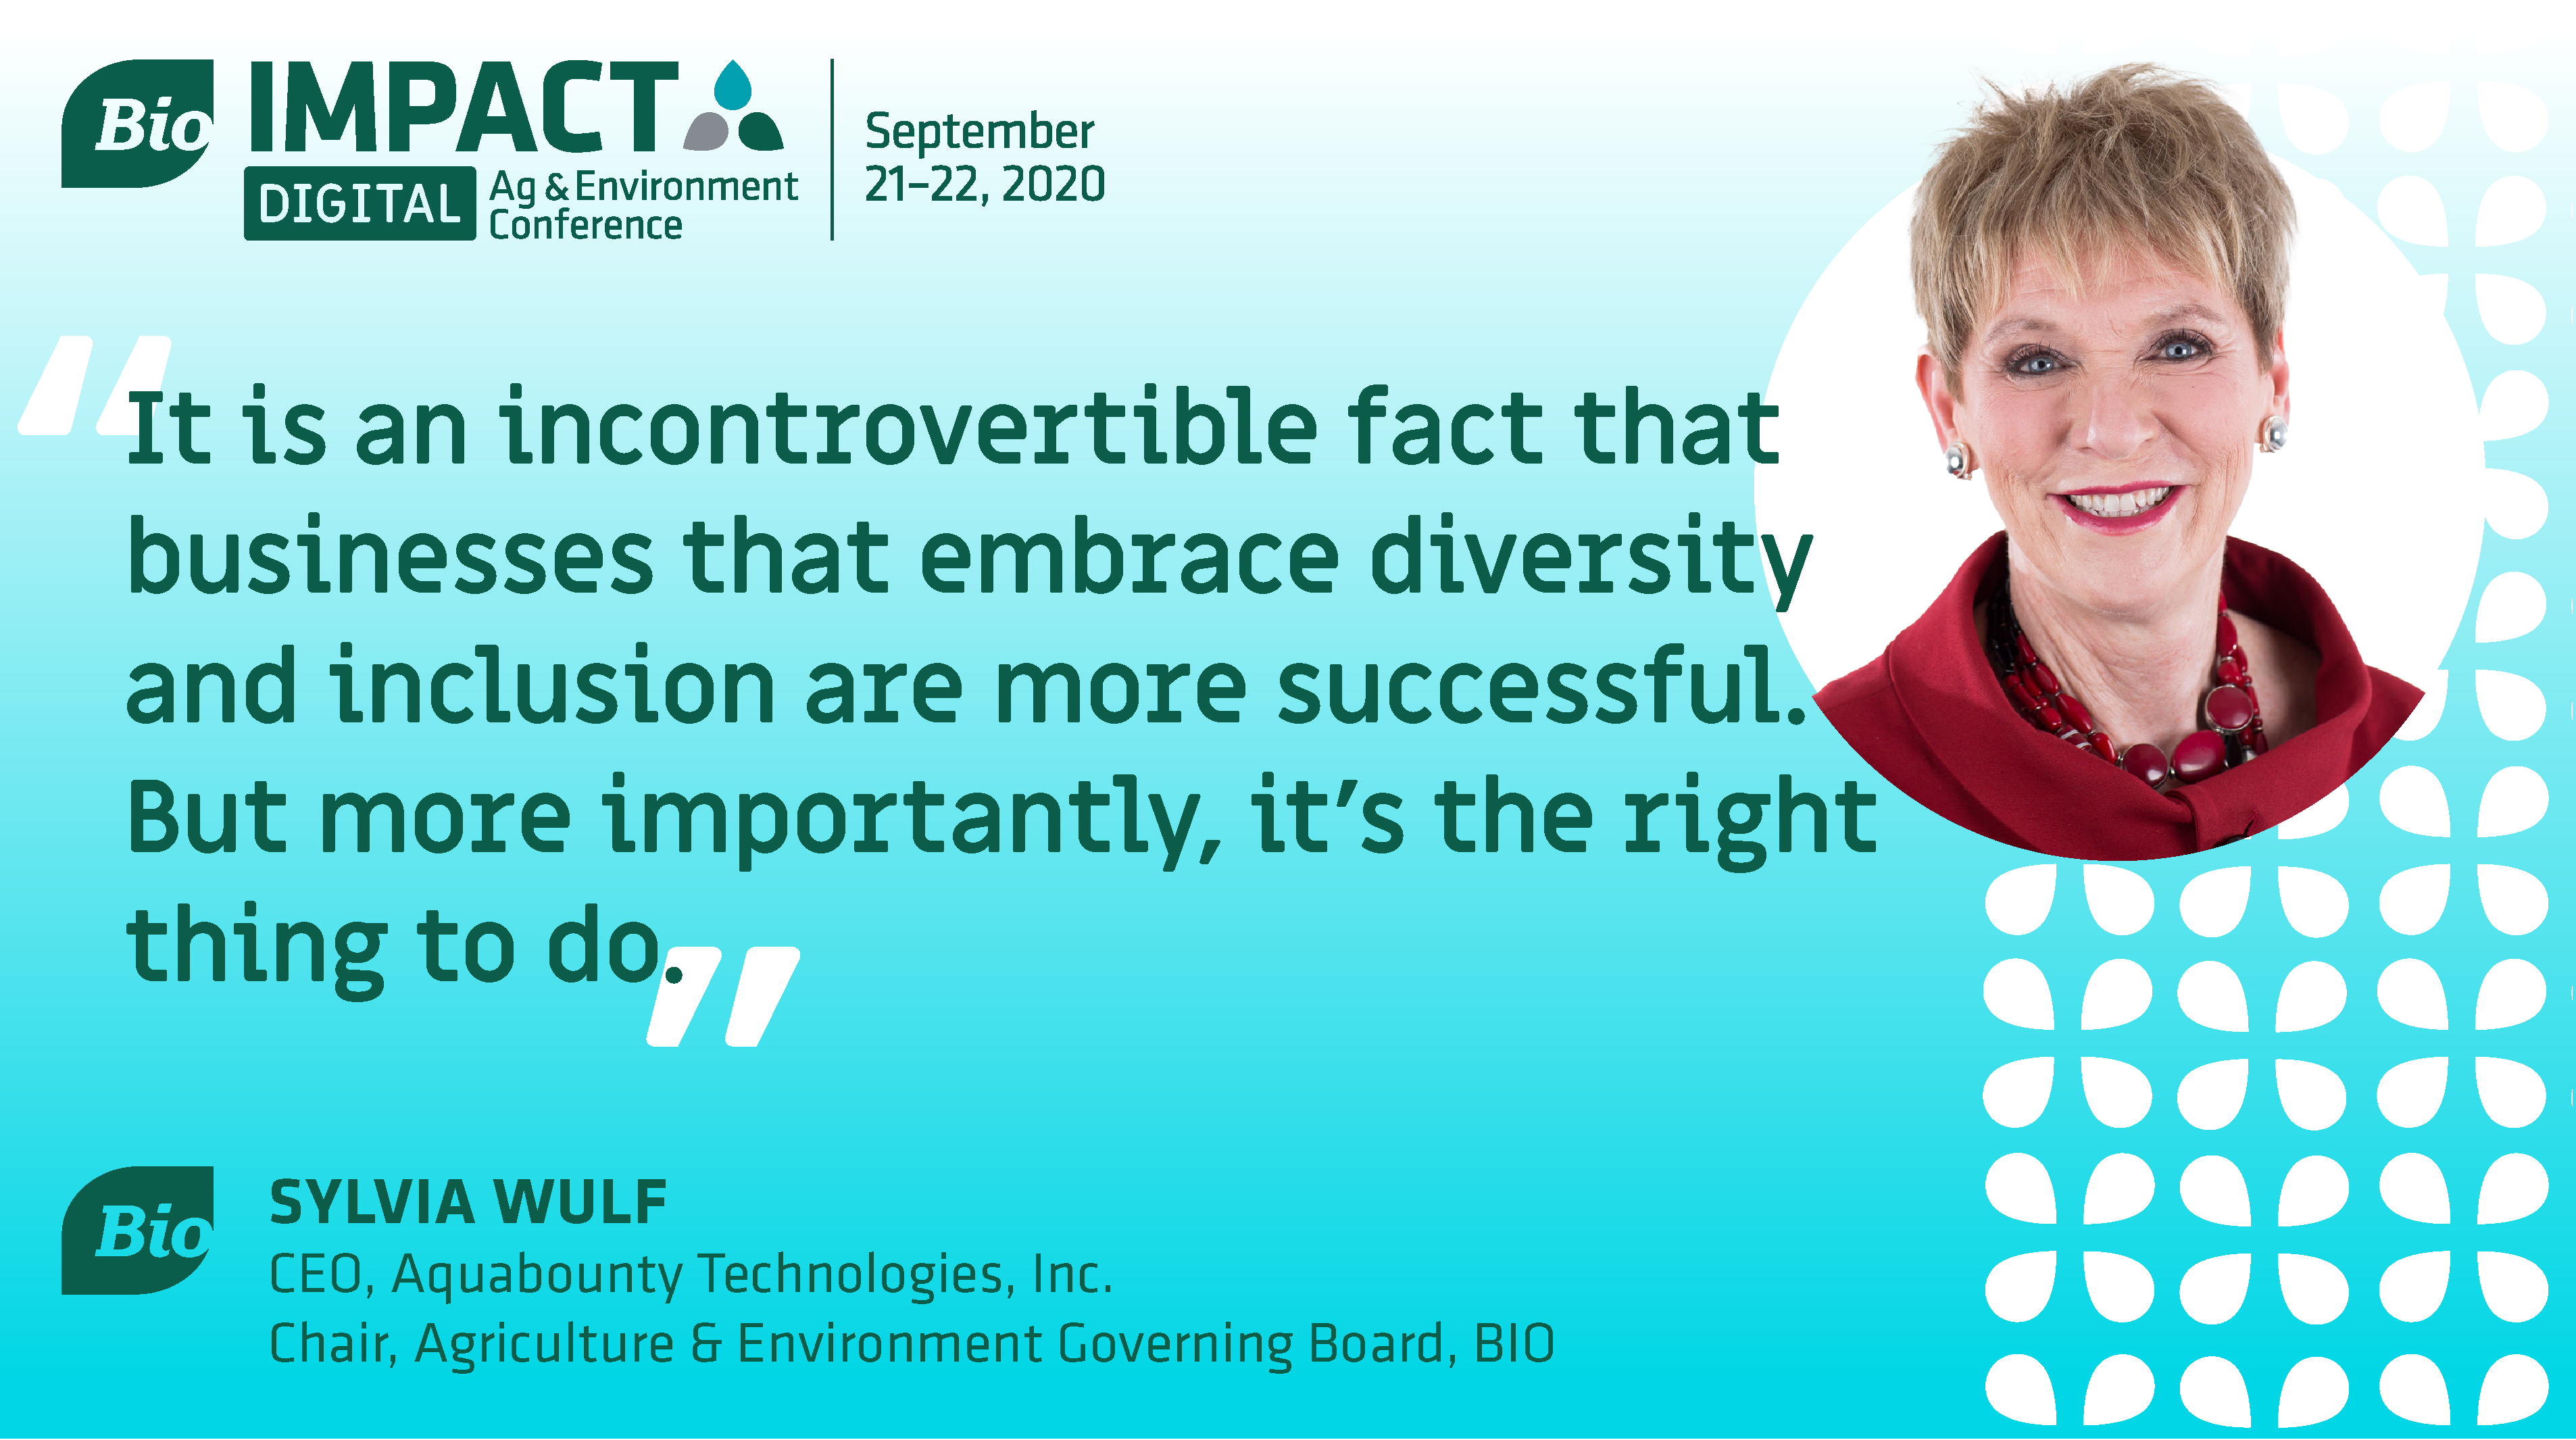 AquaBounty Technologies CEO Sylvia Wulf says diversity is good for business.